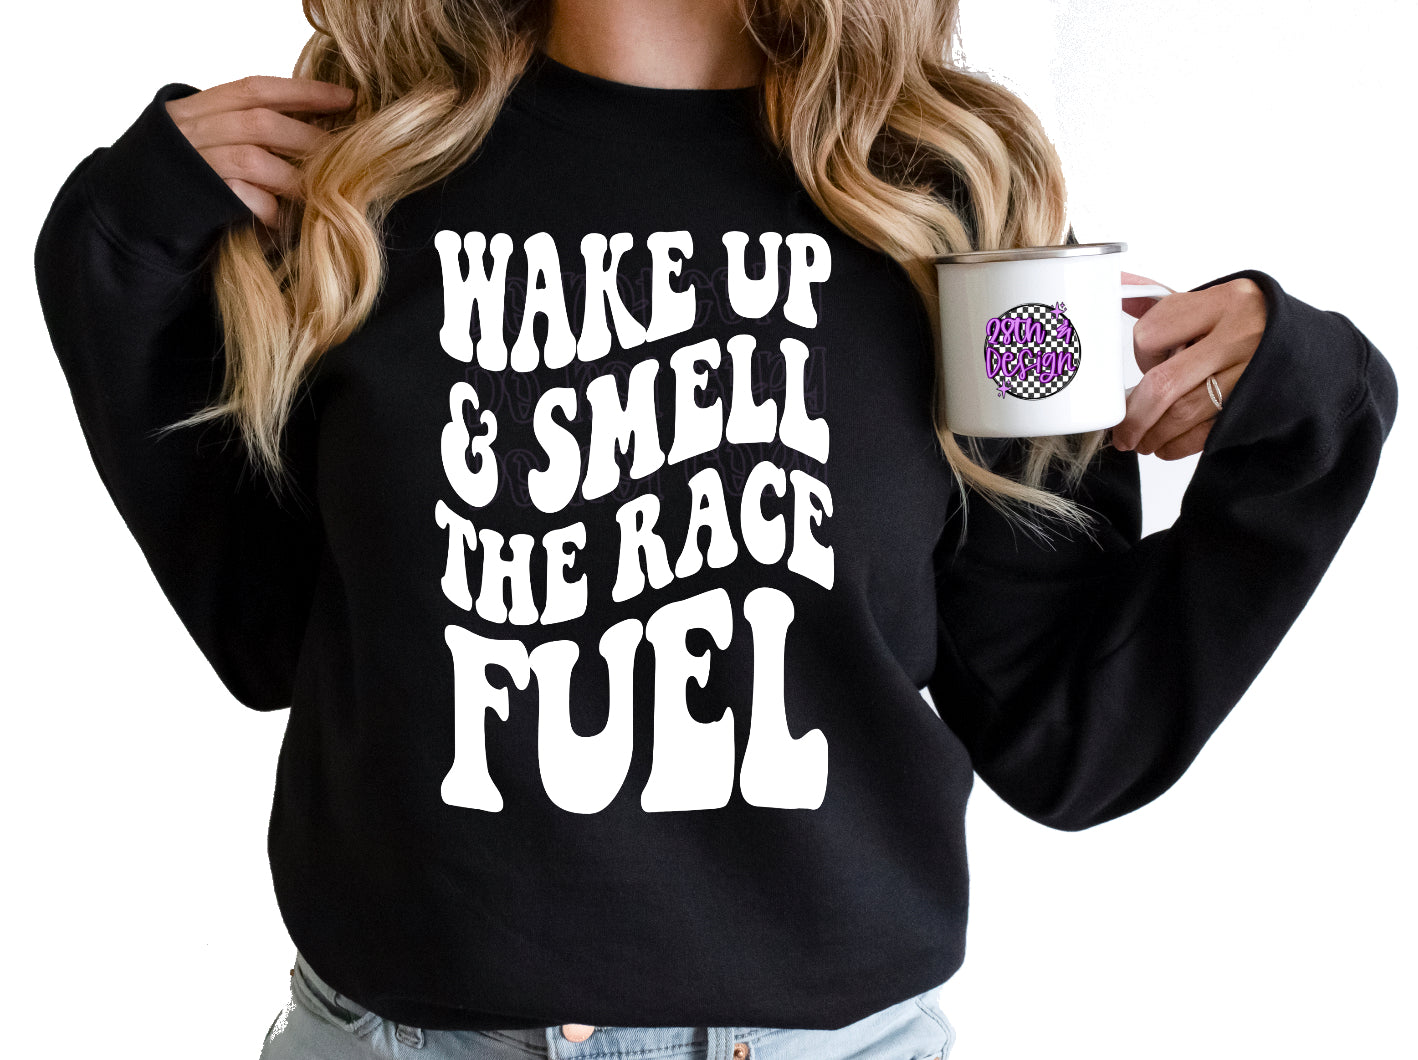 WAKE UP AND SMELL THE RACE FUEL